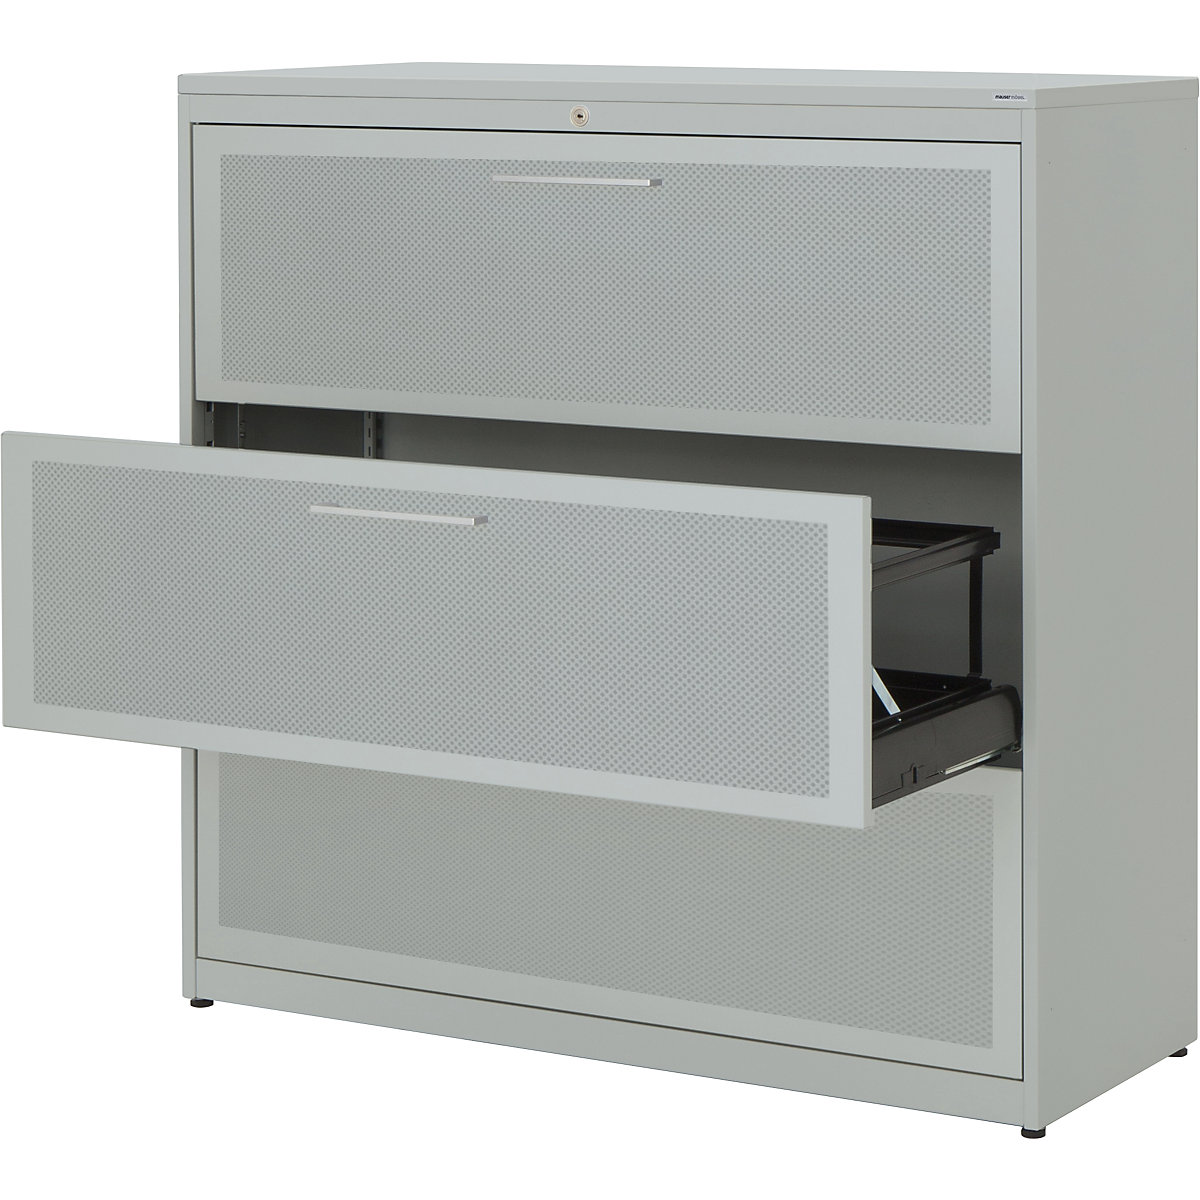 Suspension filing cabinet – mauser, 3 drawers, 3-track, light grey / light grey / light grey-5